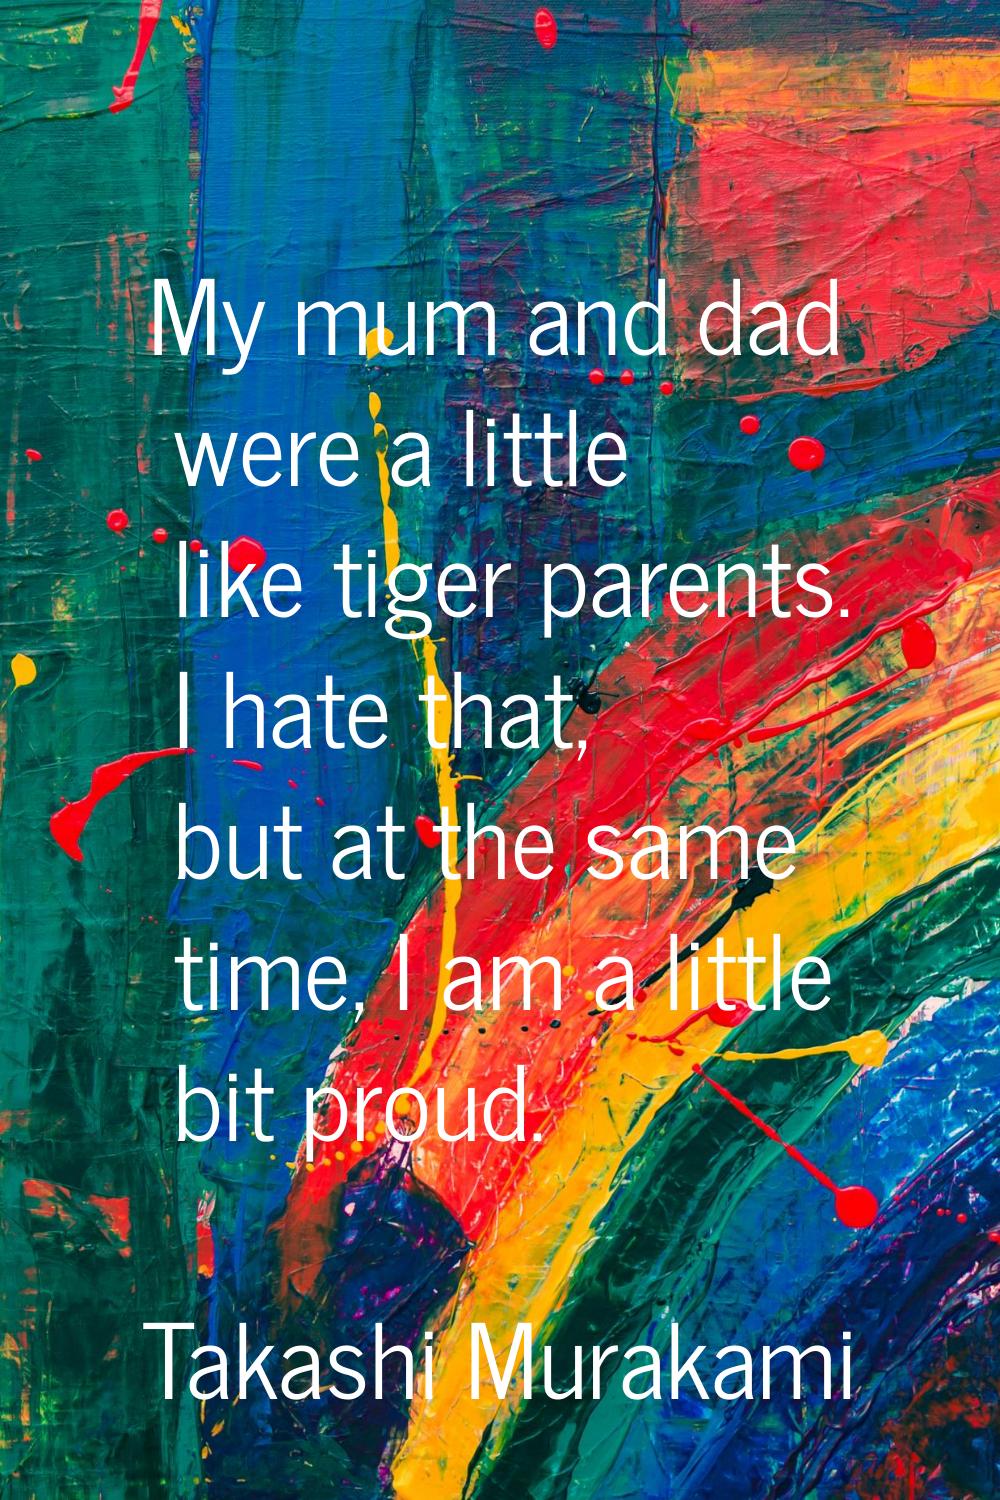 My mum and dad were a little like tiger parents. I hate that, but at the same time, I am a little b